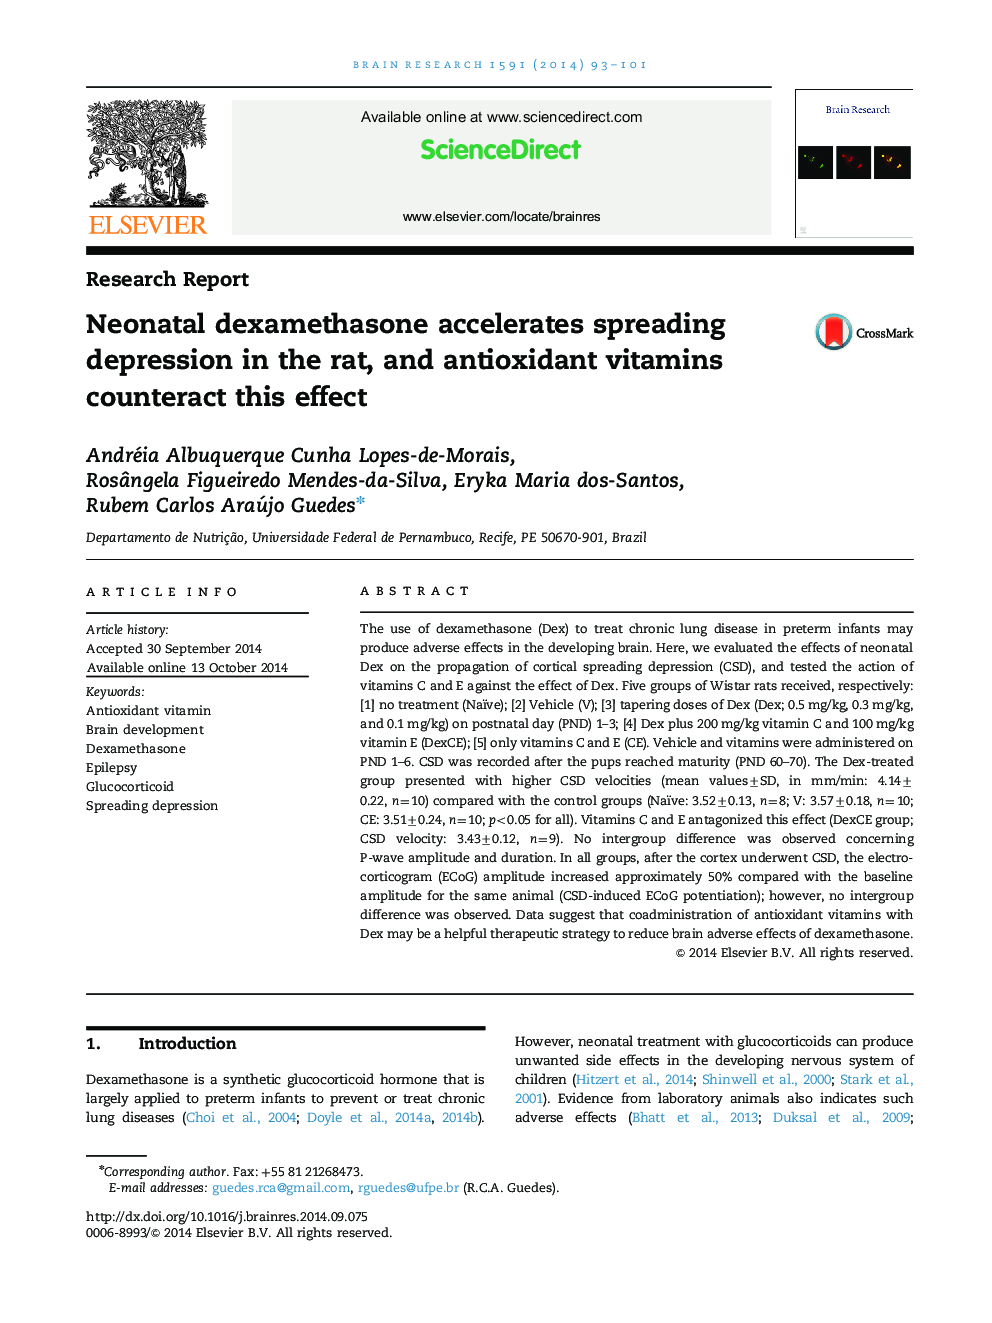 Research ReportNeonatal dexamethasone accelerates spreading depression in the rat, and antioxidant vitamins counteract this effect